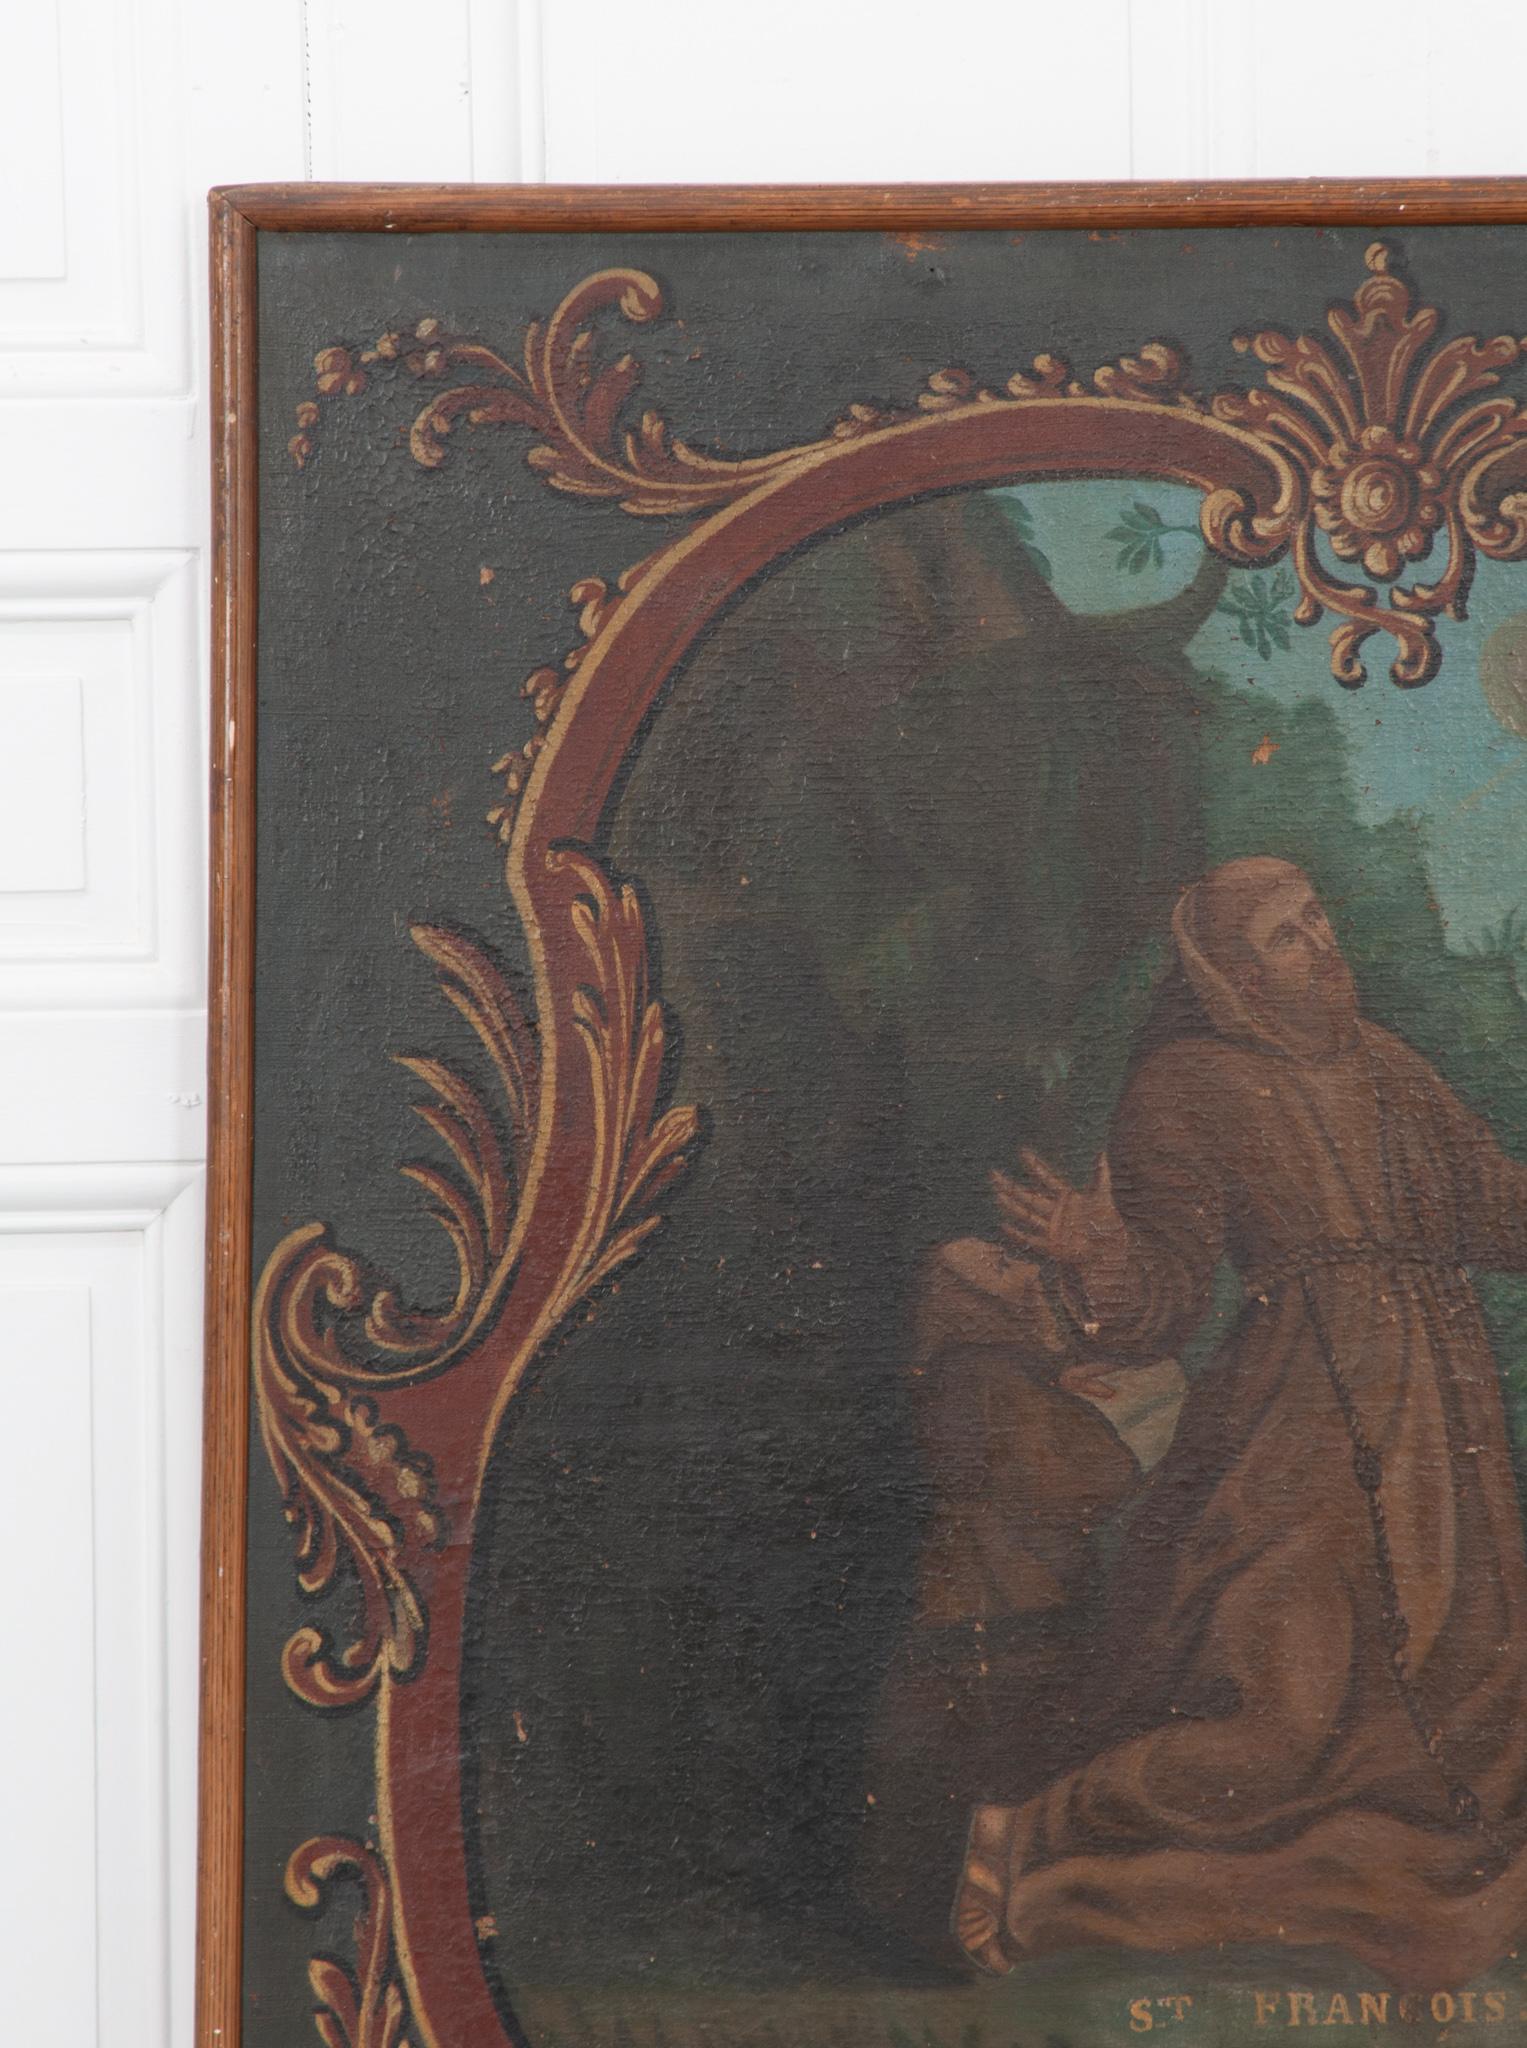 Framed Painting of St. Francis of Assisi In Good Condition For Sale In Baton Rouge, LA